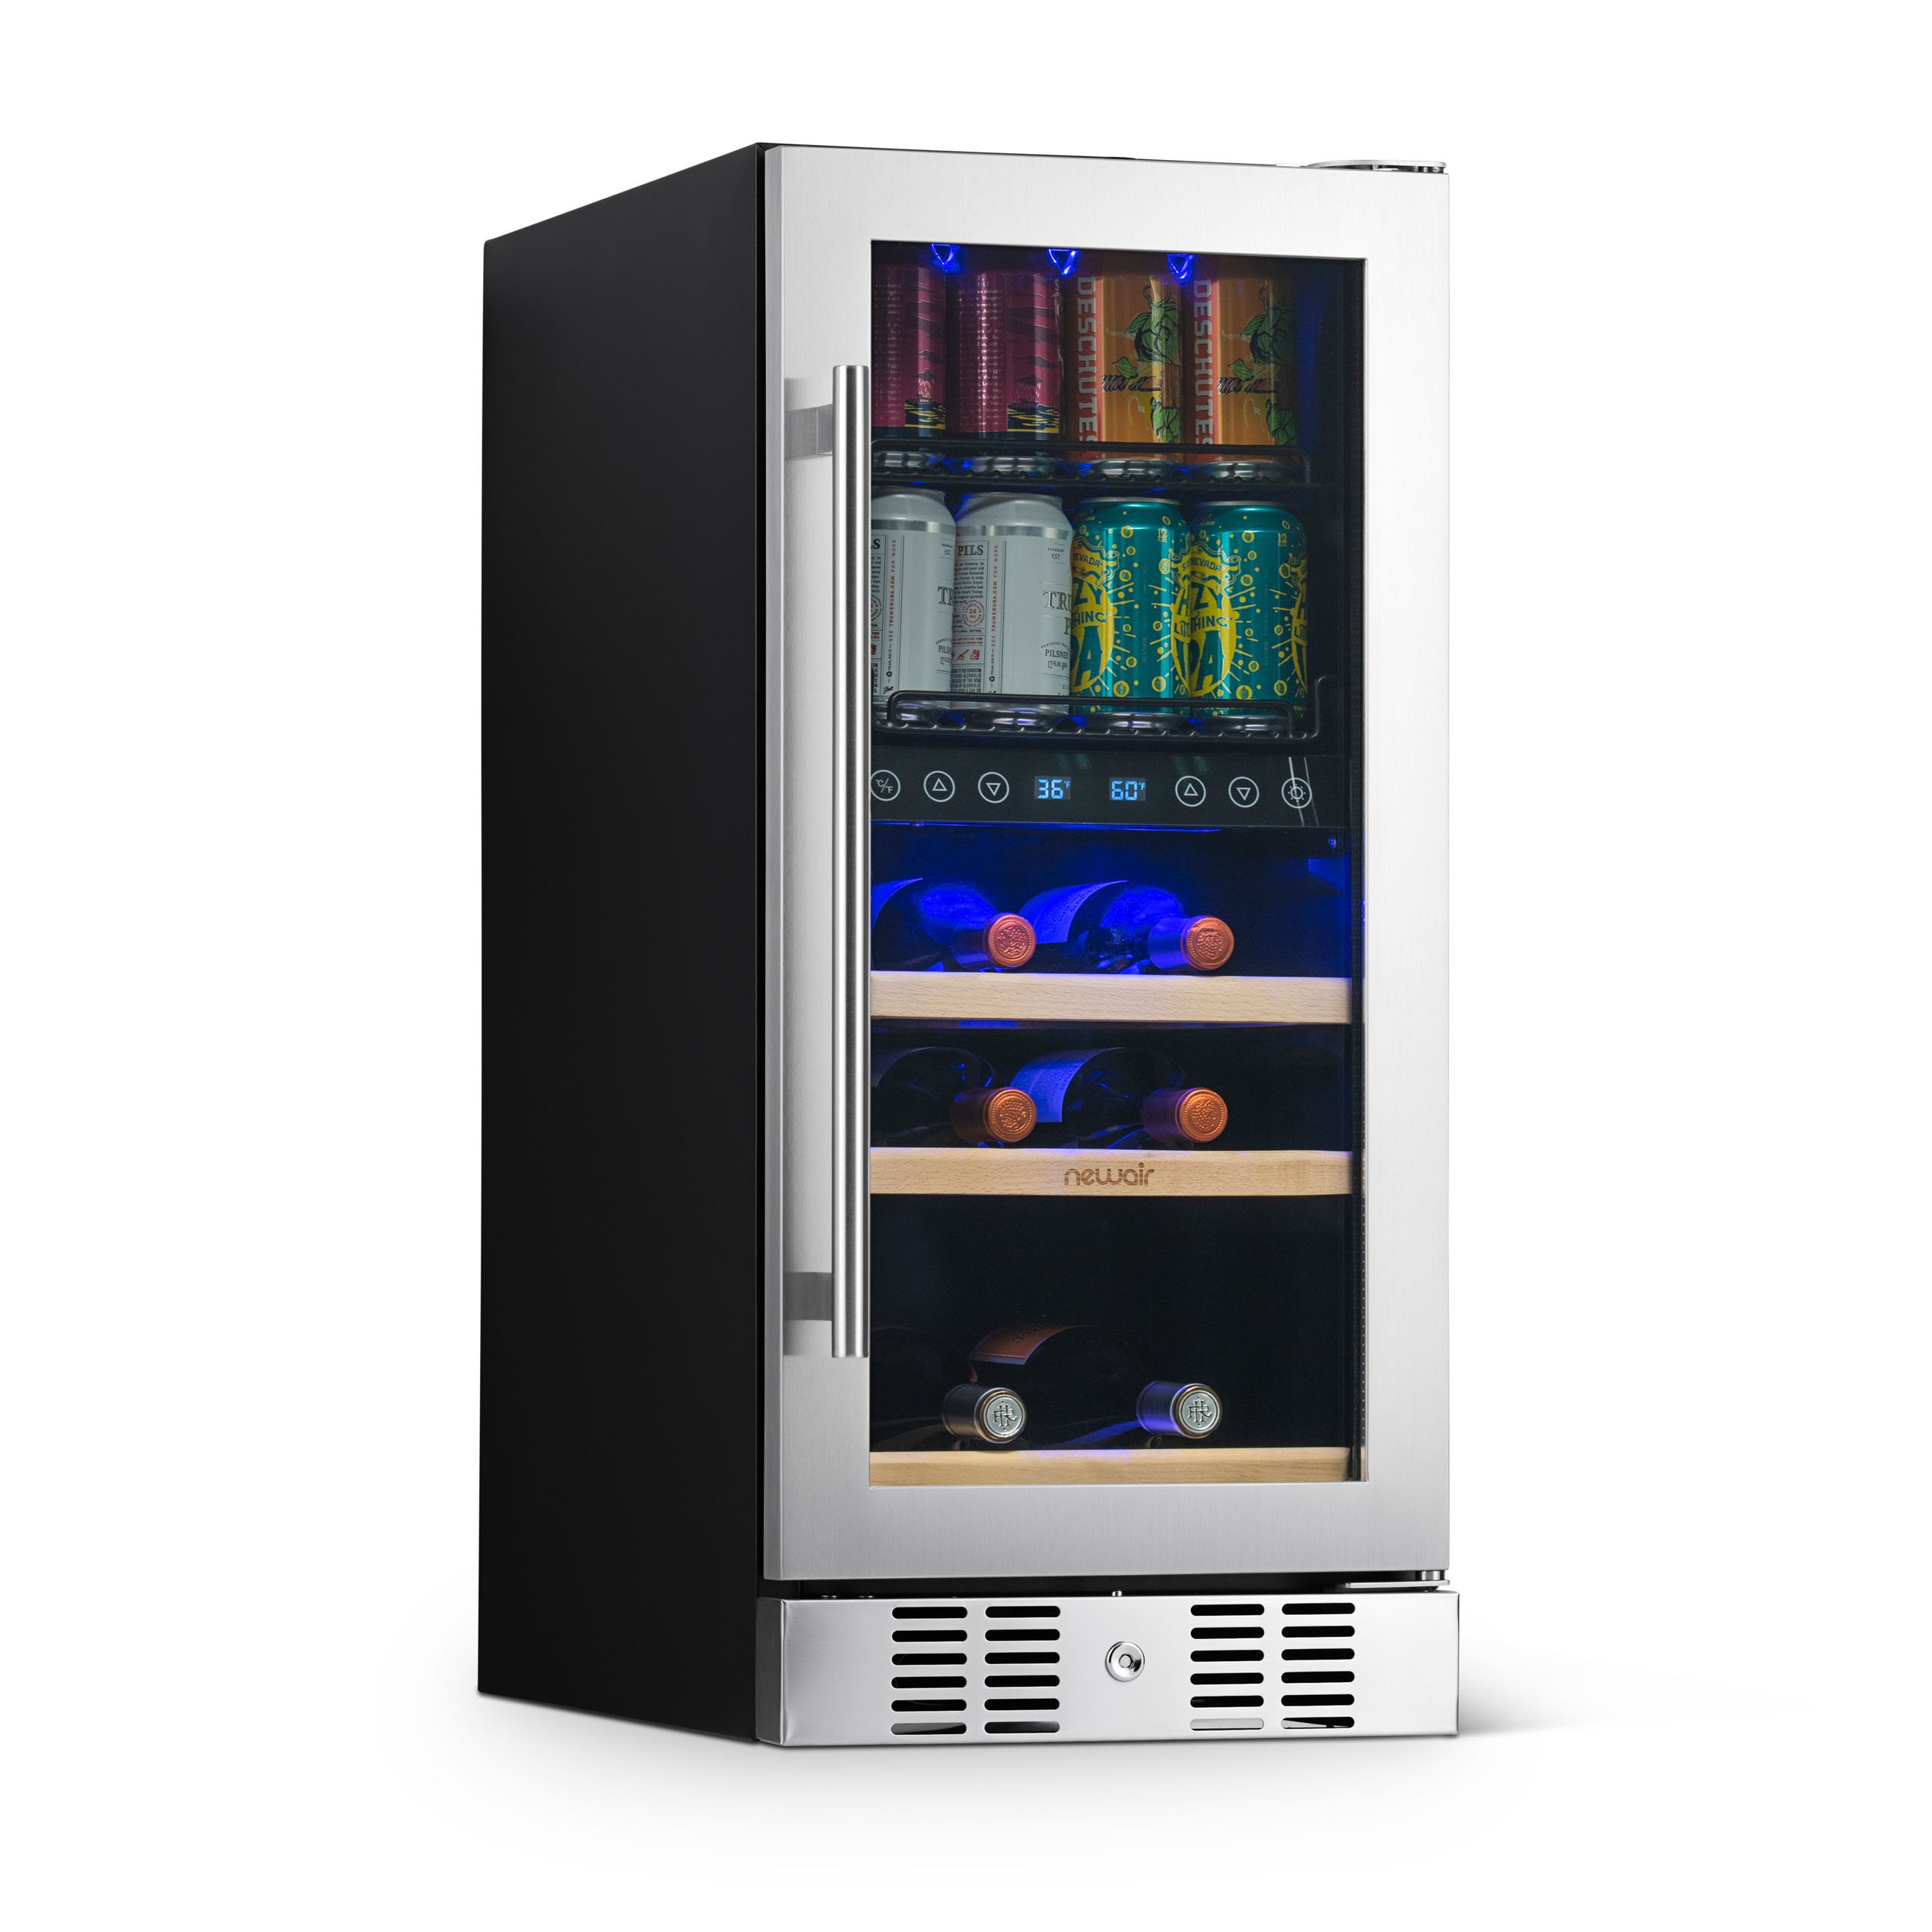 Newair 15” Premium Built-in Dual Zone 9 Bottle and 48 Can Wine and Beverage Fridge in Stainless Steel- NWB057SS00 - image 1 of 8